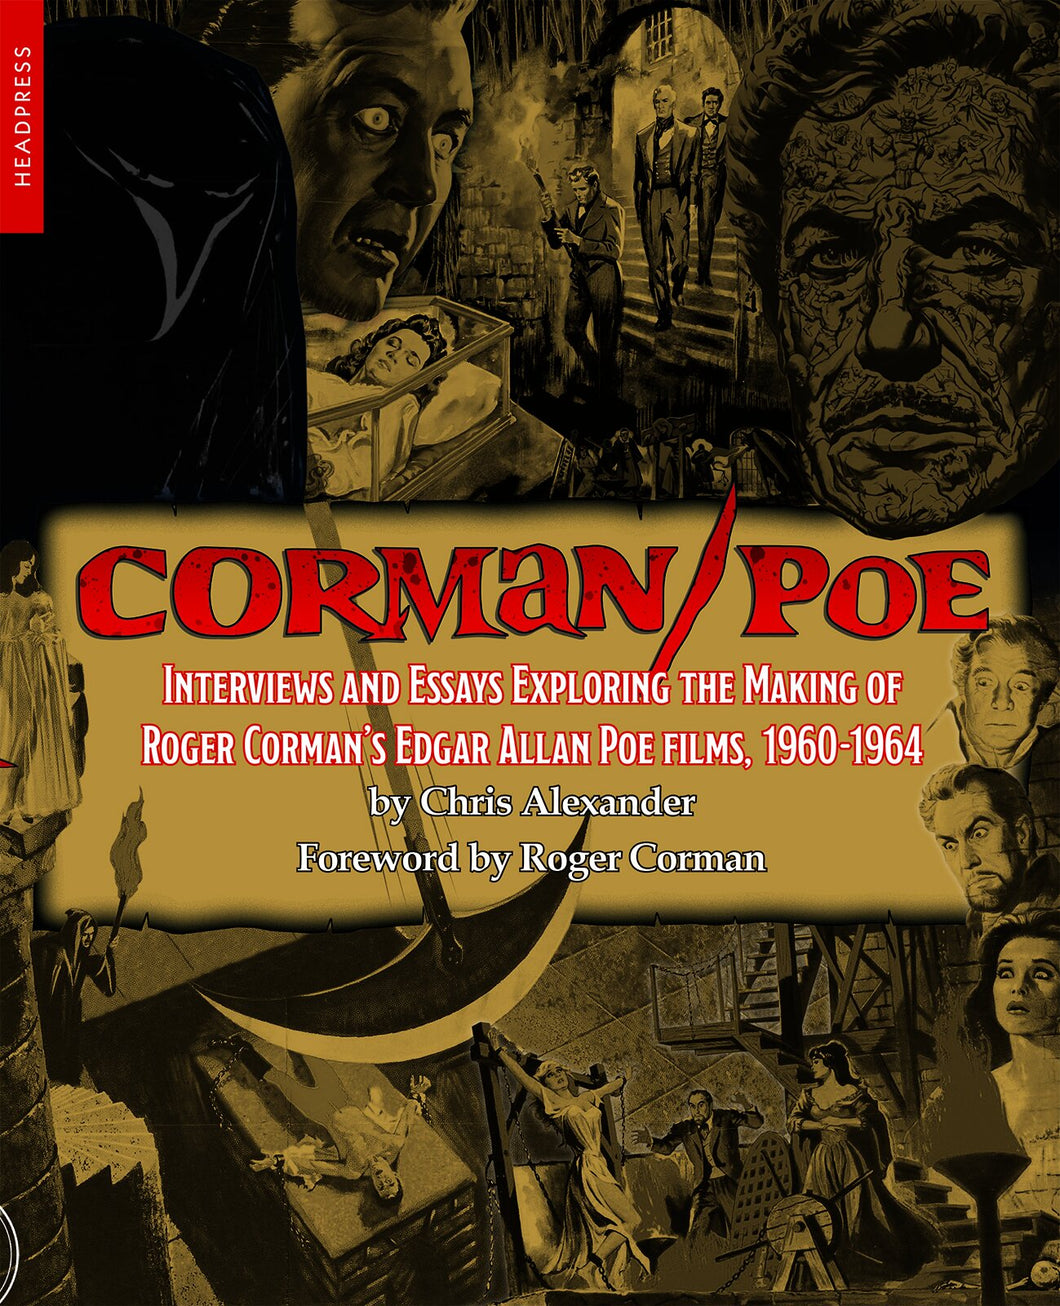 Signed Book - CORMAN/POE: Interviews and Essays Exploring the Making of Roger Corman’s Edgar Allan Poe Films, 1960-1964